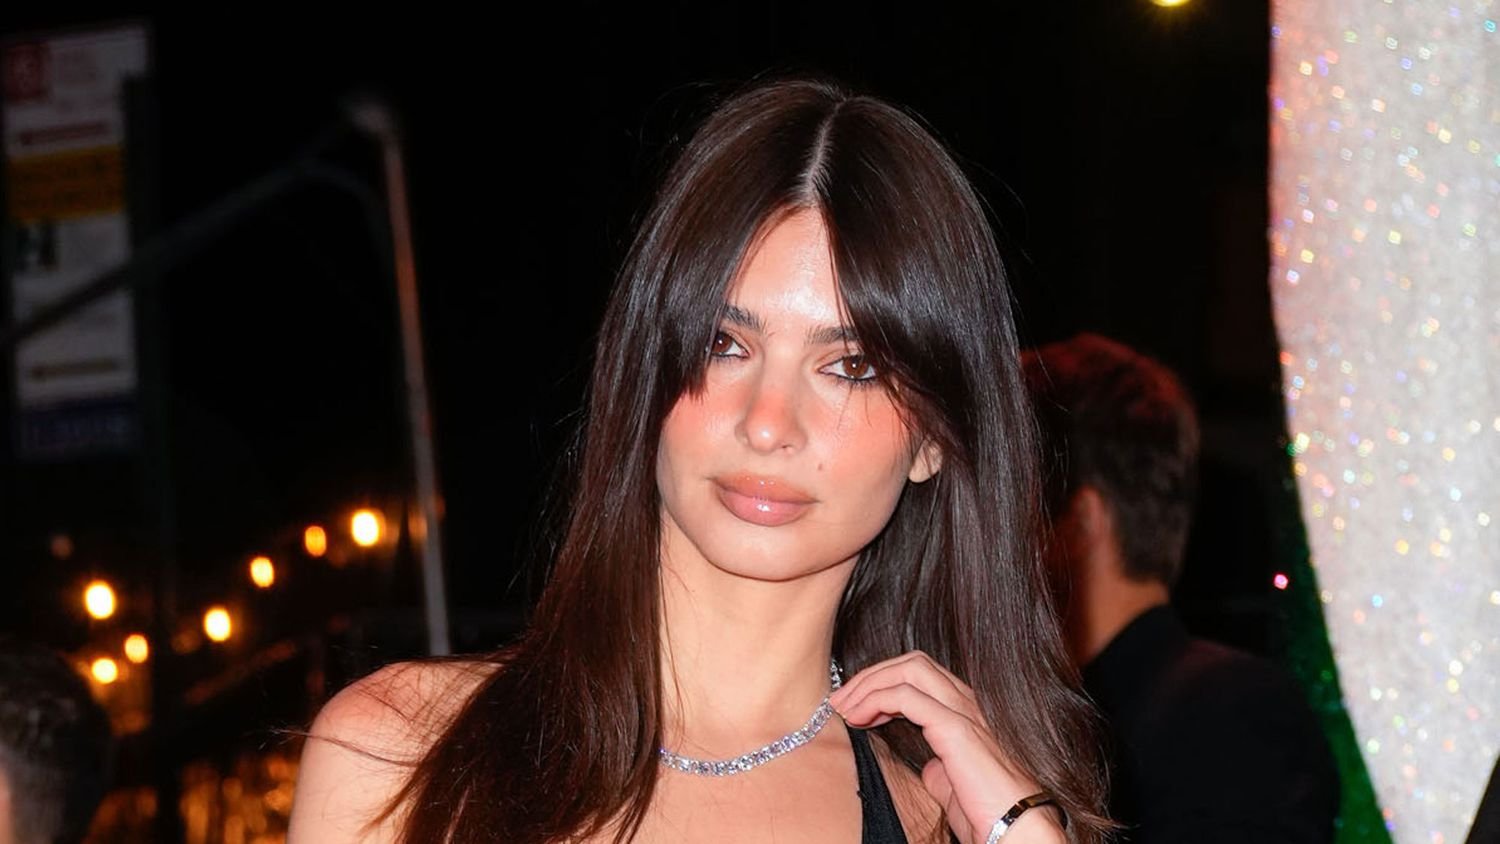 The Front of Emily Ratajkowski’s Plunging Holiday Dress Was Completely See-Through